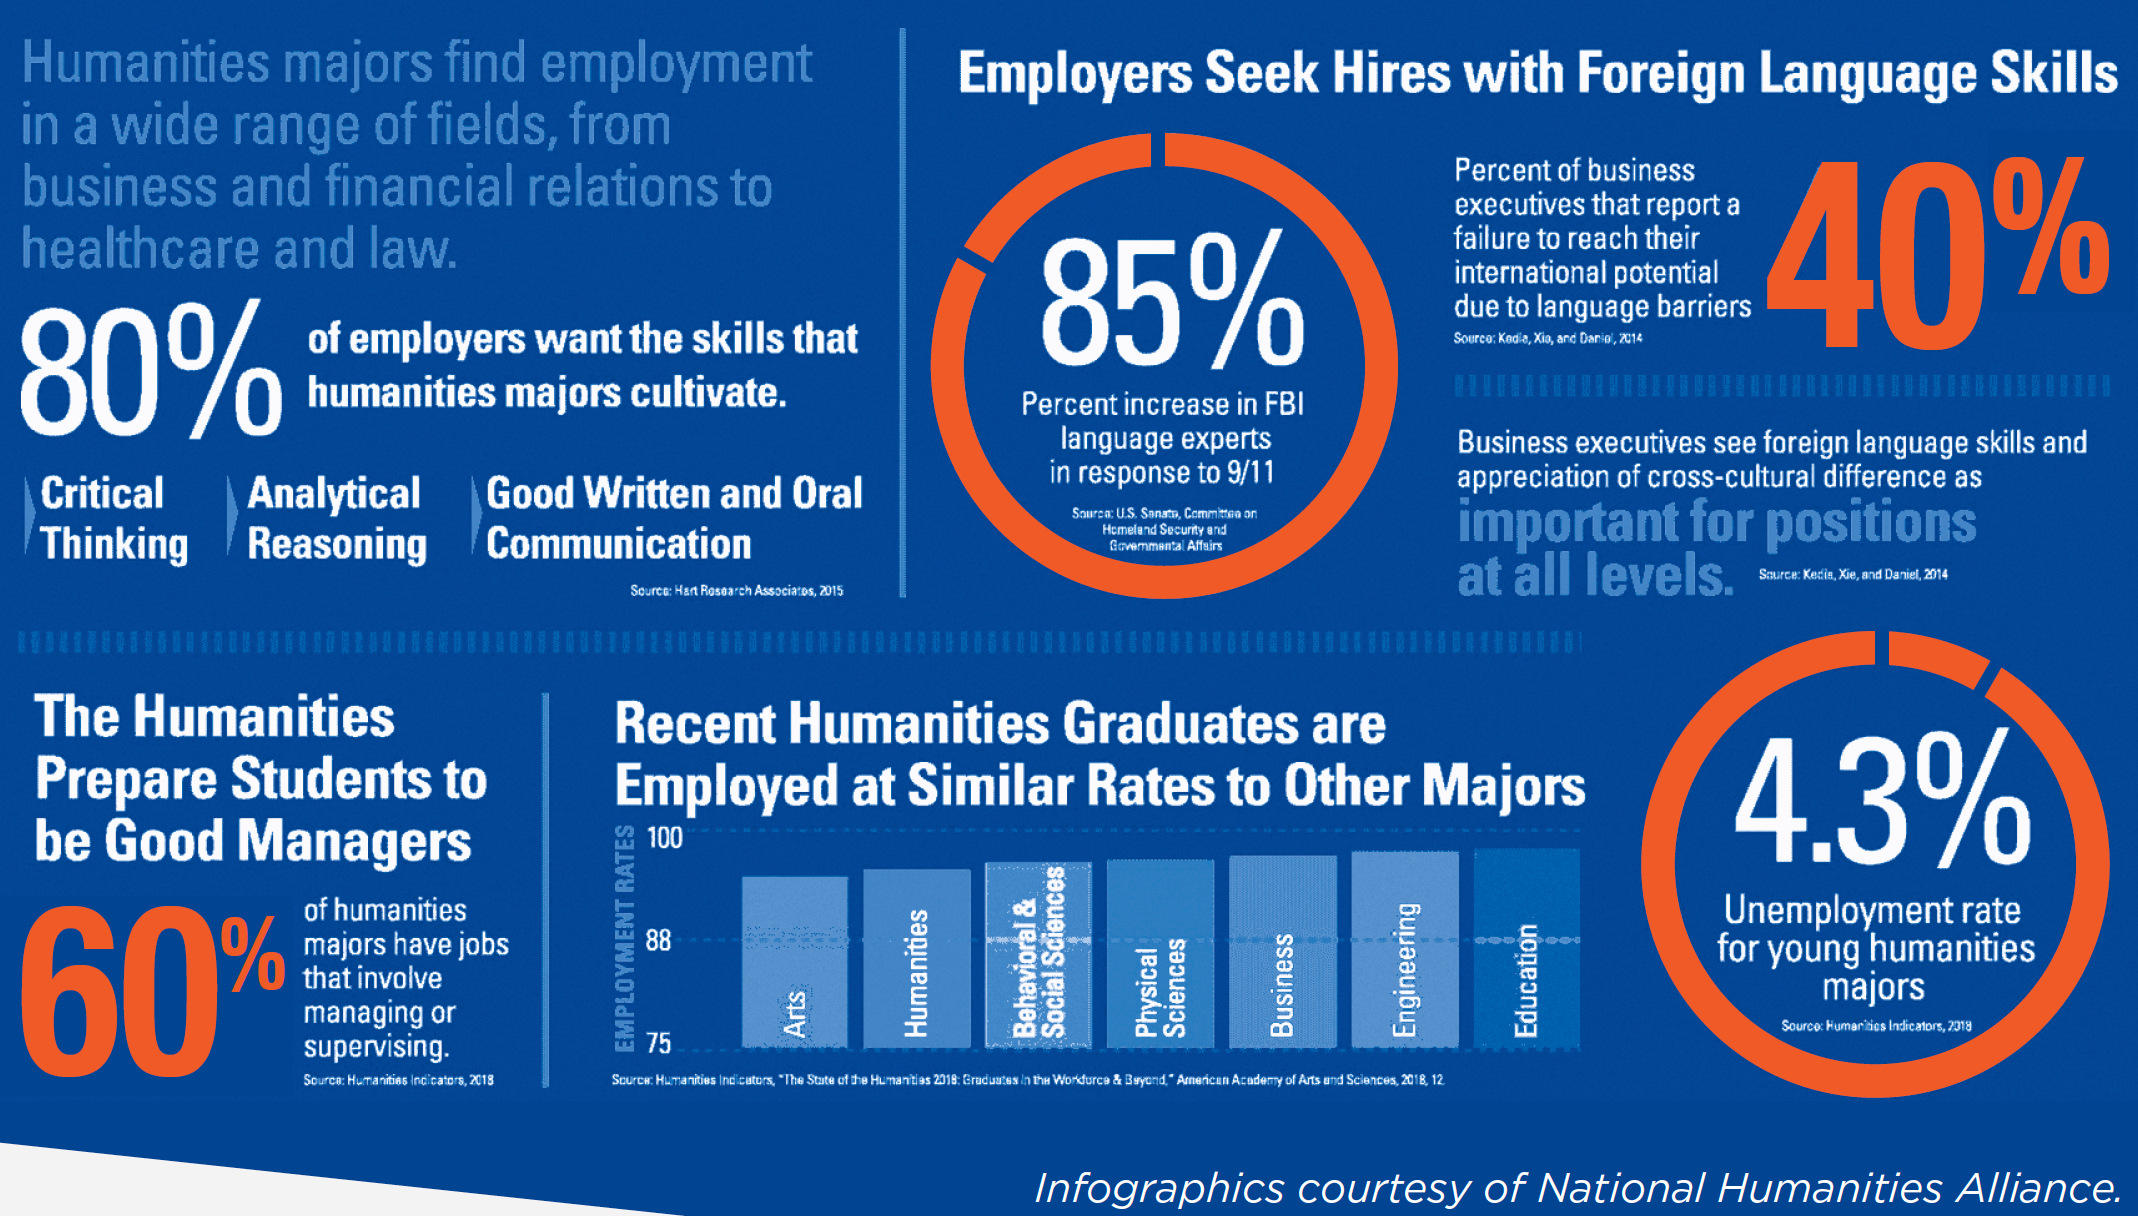 infographic: 80% of employers want the skills that humanities majors cultivate, like critical thinking, analytical reasoning, and good oral and written communication. The humanities prepare students to be good managers. 60% of humanities majors have jobs that involve managing and supervising. Employers seek hires with foreign language skills. 85% increase in FBI language experts in response to 9/11. 40% of business executives that report a failure to reach their international potential due to language barriers. 4.3% unemployment rate for young humanities majors. 